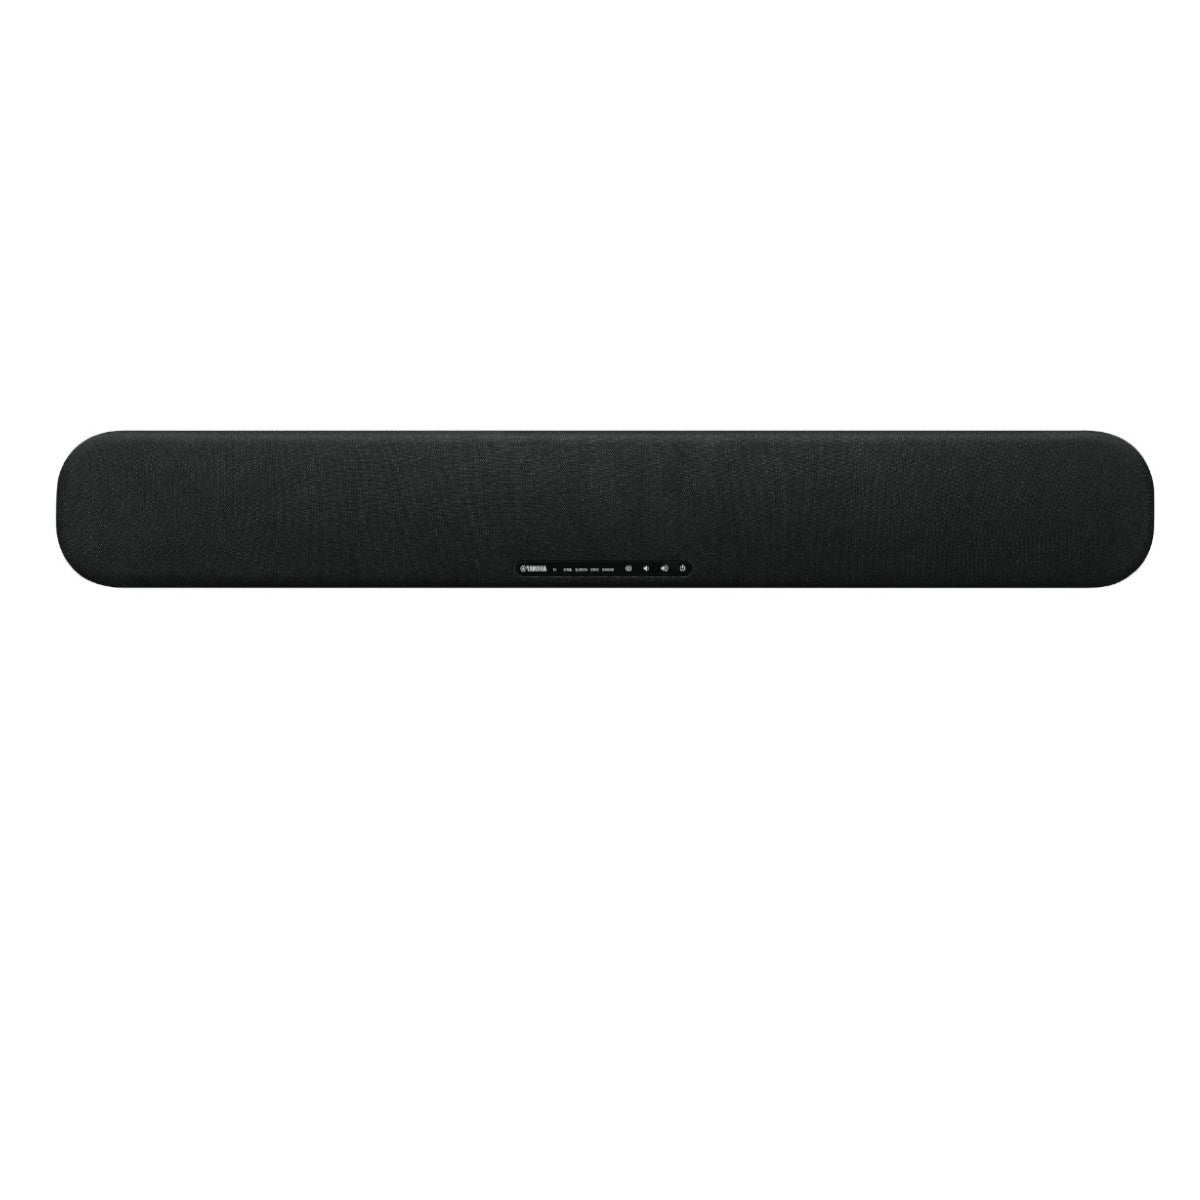 Yamaha SR-B20A Soundbar with Built-in Subwoofer - Front View